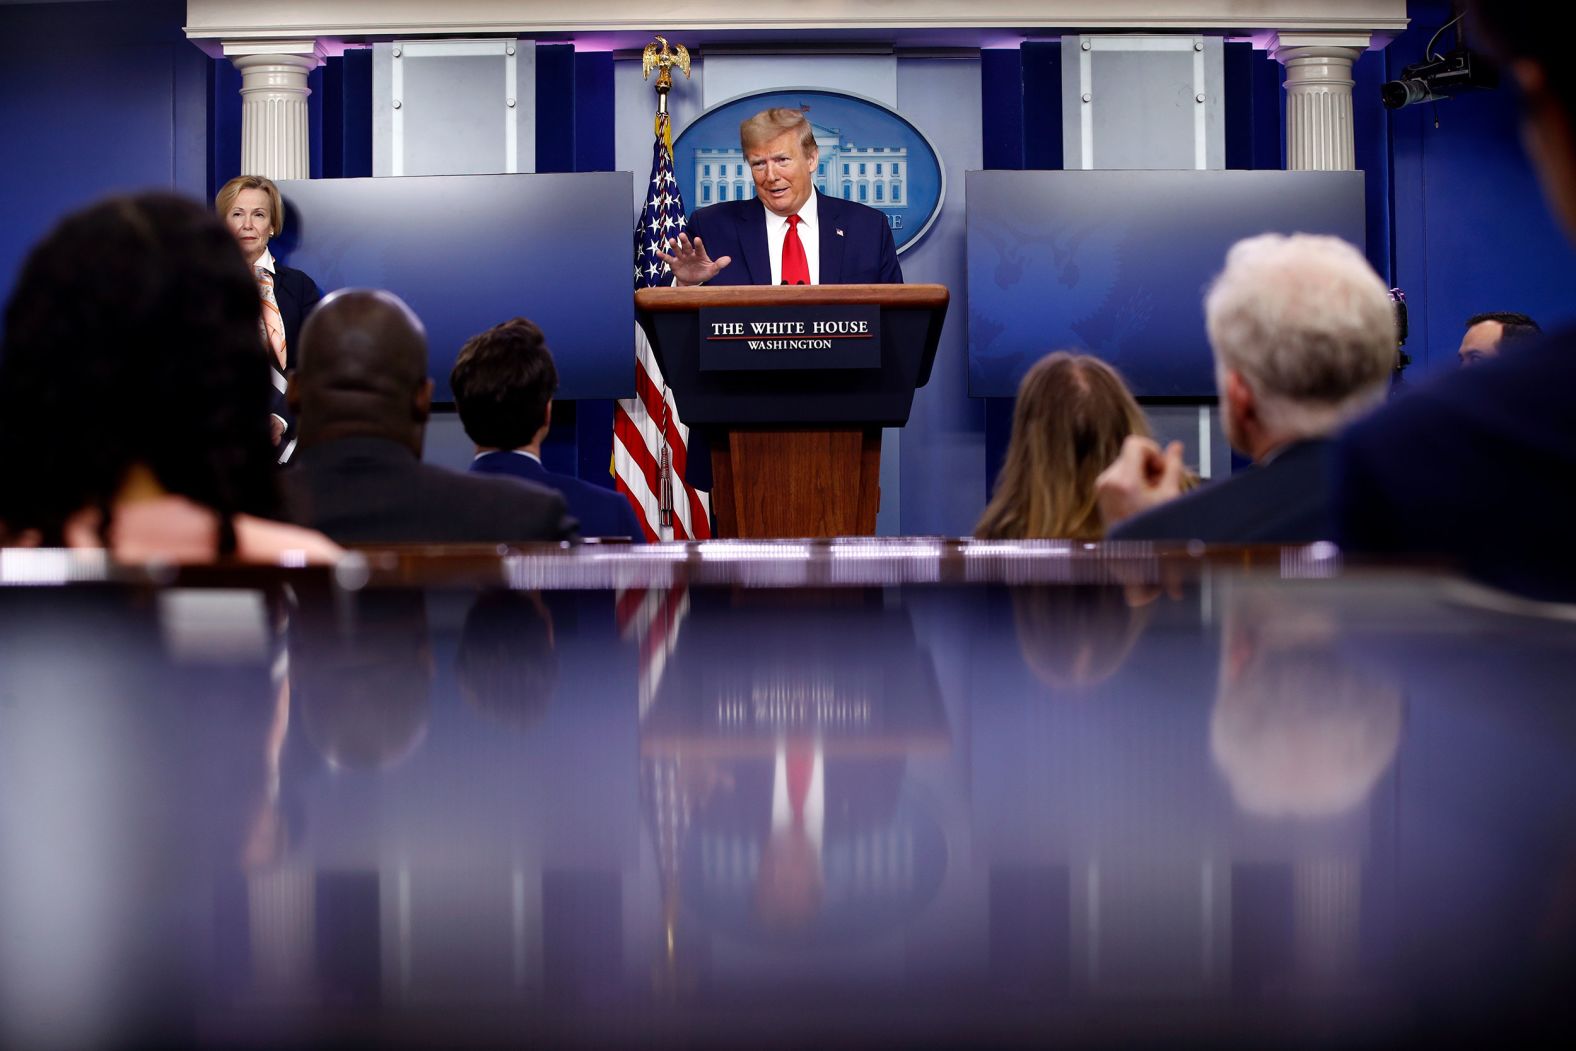 Trump speaks during the coronavirus briefing on April 18. Trump <a href="index.php?page=&url=https%3A%2F%2Fwww.cnn.com%2F2020%2F04%2F18%2Fpolitics%2Ftrump-governors-testing%2Findex.html" target="_blank">repeatedly blamed governors</a> for not making full use of coronavirus testing capacity in their states, even as several Democrat and Republican governors said they were facing shortages of critical supplies to conduct tests. "They don't want to use all of the capacity that we've created. We have tremendous capacity," Trump said. "They know that. The governors know that. The Democrat governors know that. They're the ones that are complaining."